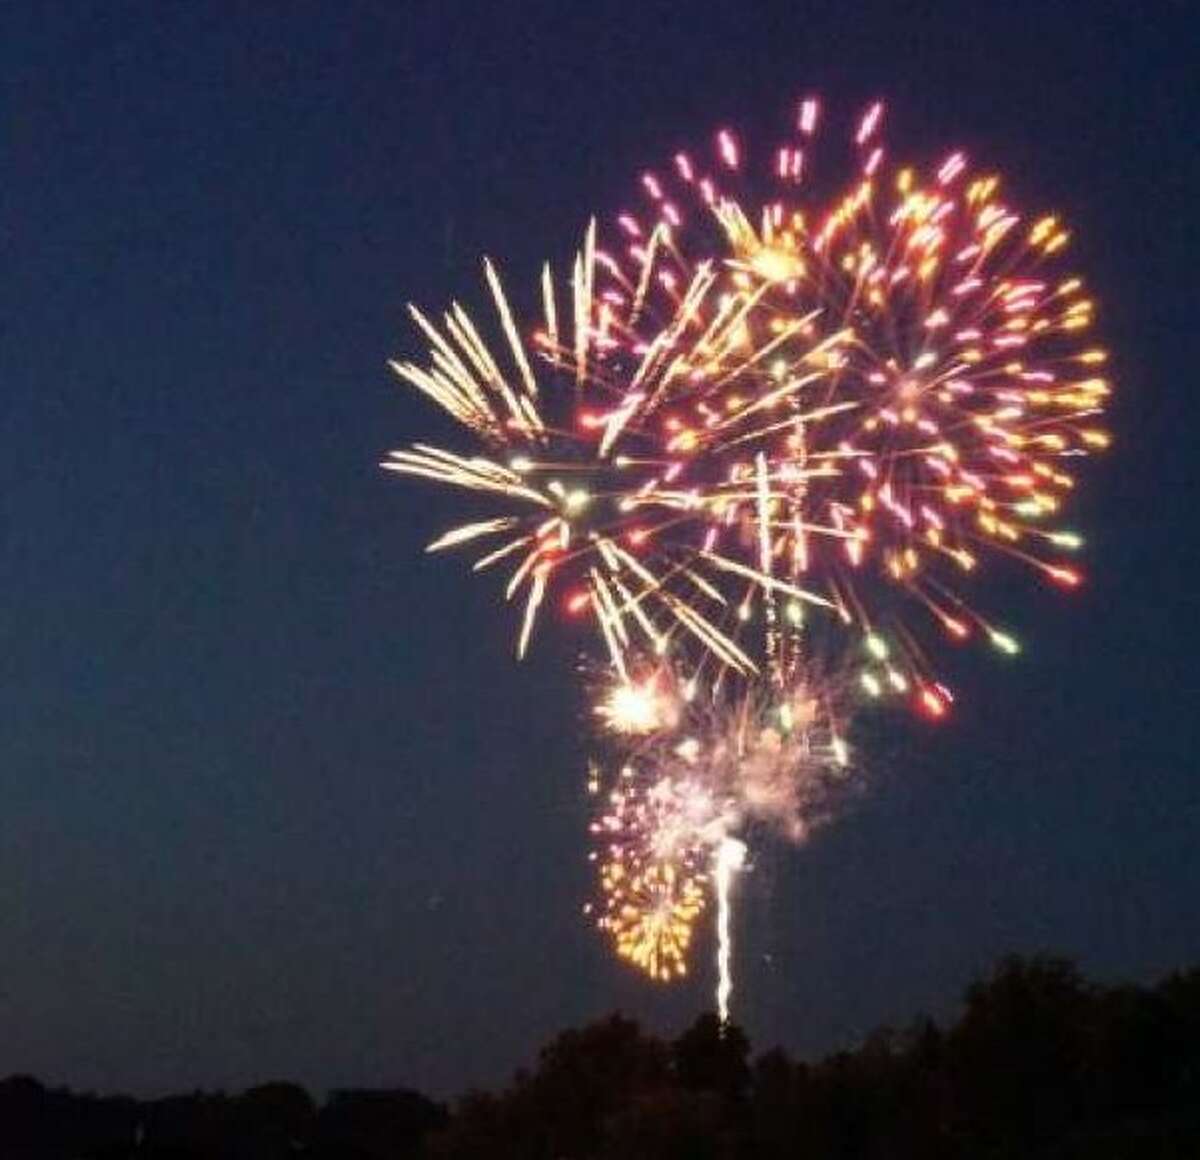 Plans for the 2022 Fourth of July fireworks display at the Mecosta County Fairgrounds are in the works.